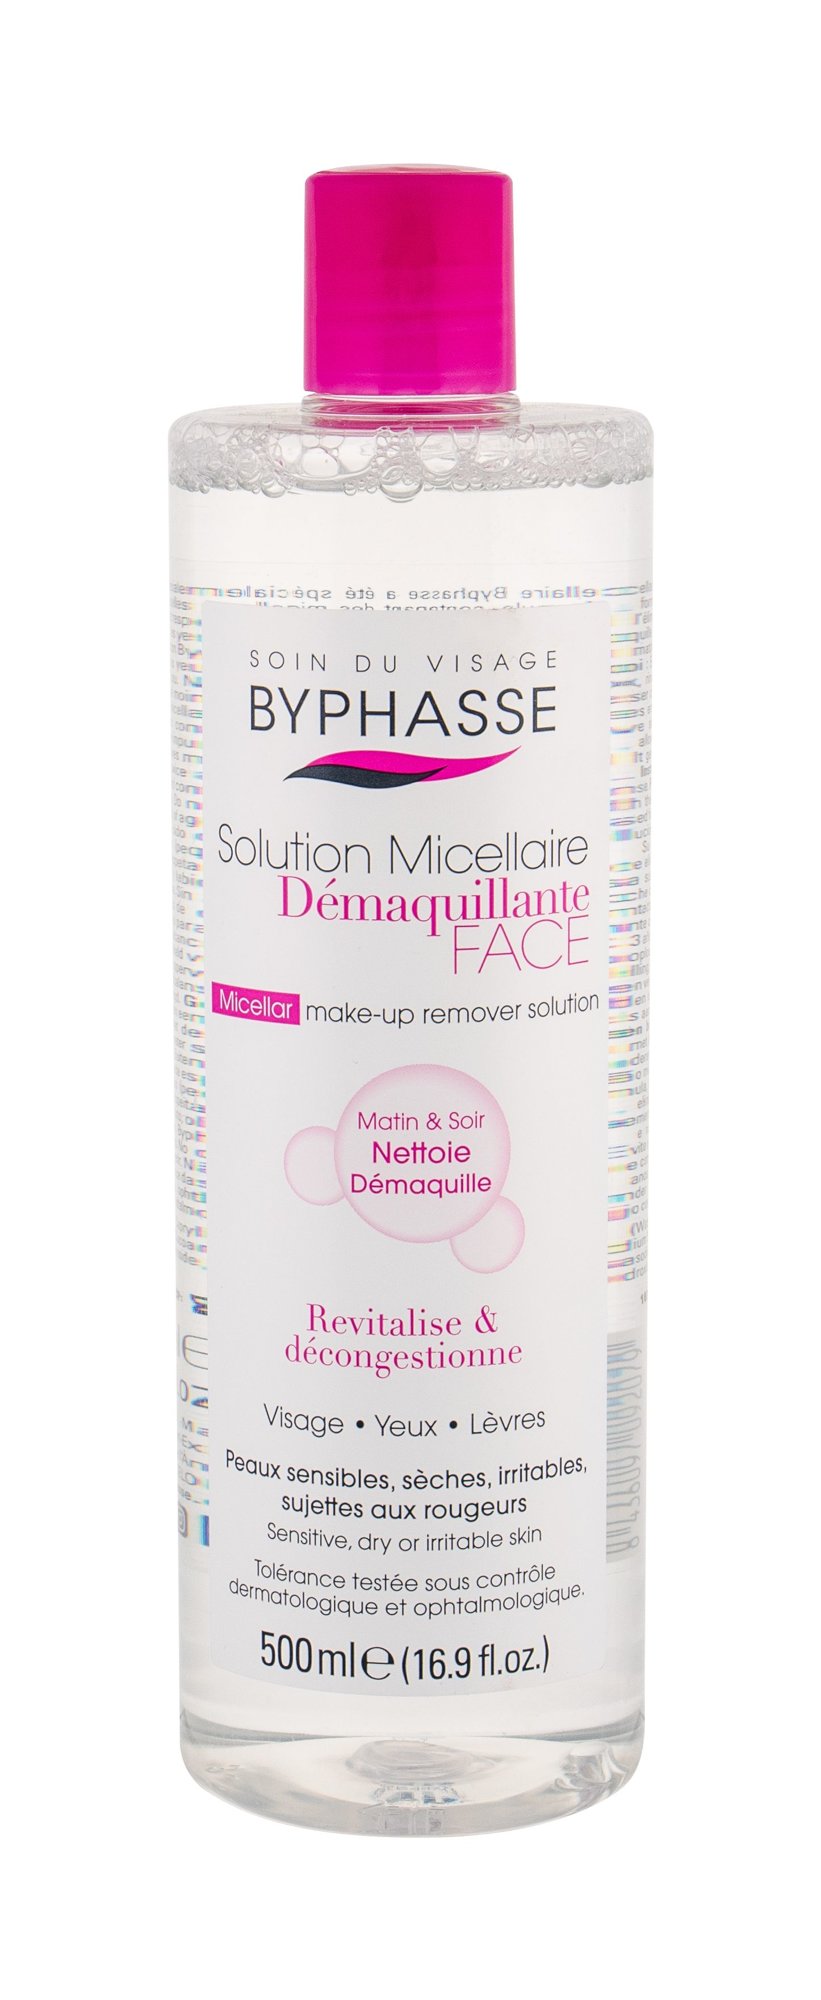 BYPHASSE Solution Micellaire